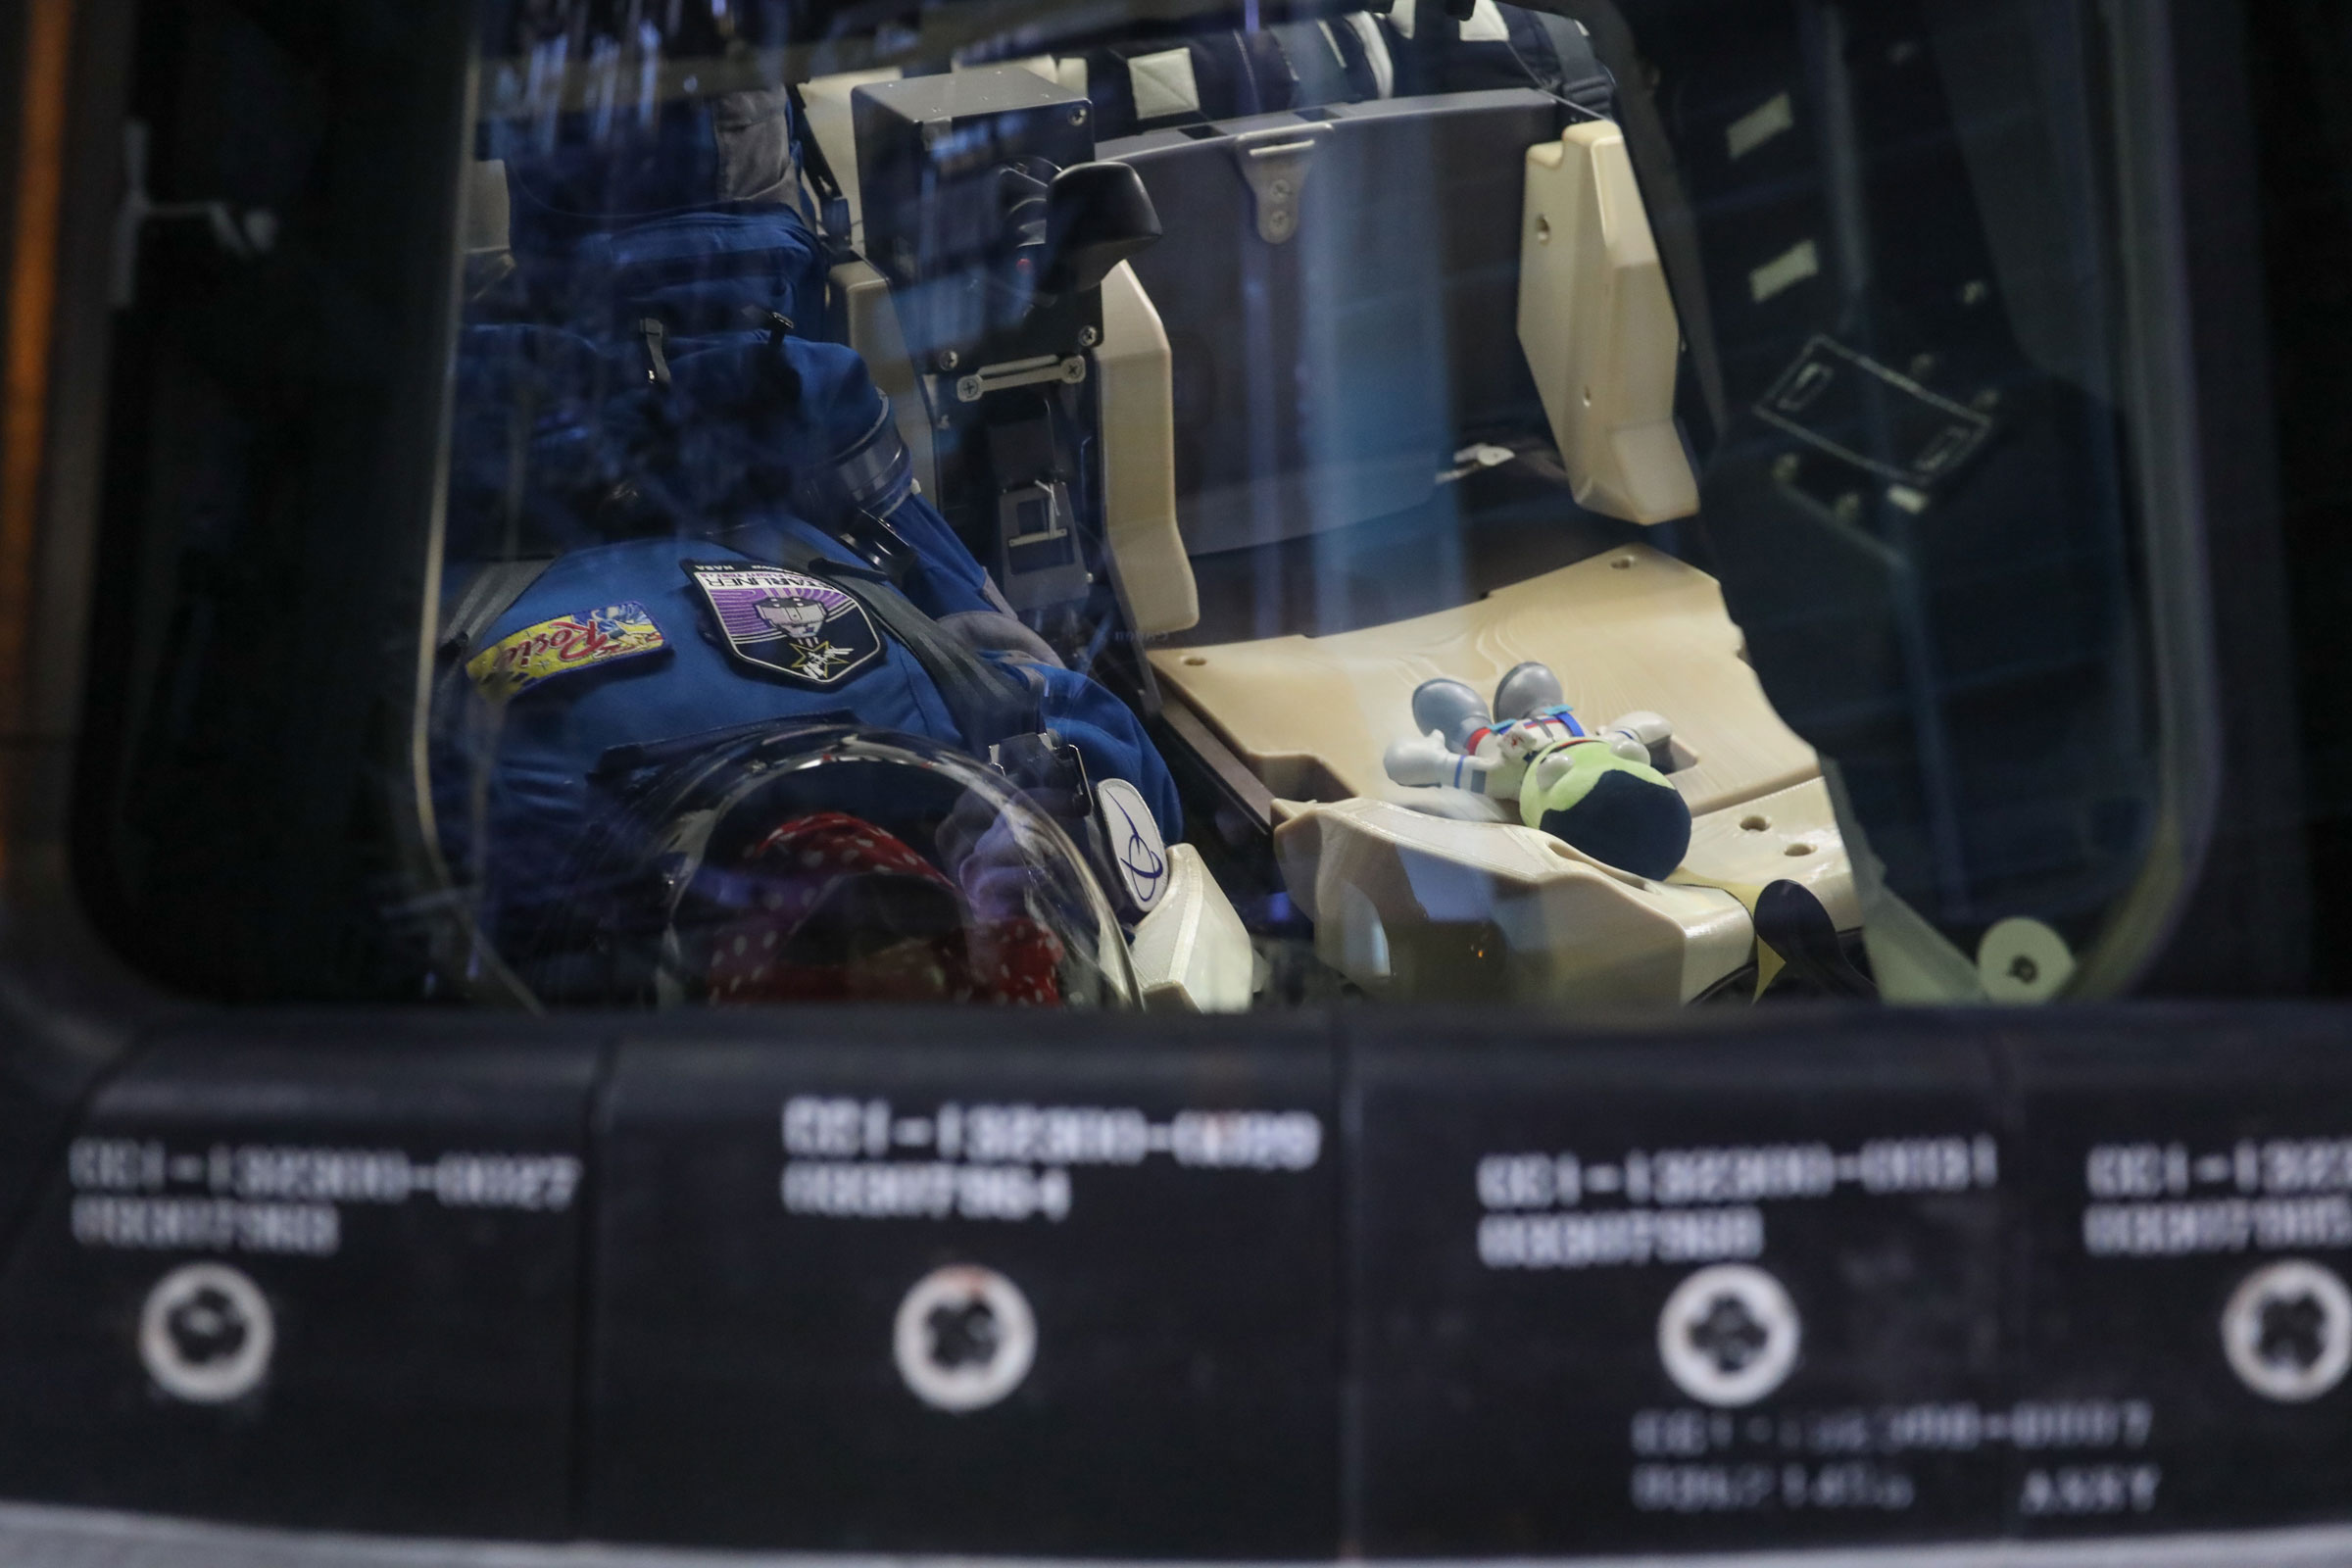 Boeing's Starliner Orbital Flight Test-2 zero-g indicator, a plush Jeb from the game Kerbal Space Program, is seen through a window into the space capsule. Jeb is seated next to "Rosie the Rocketeer," an anthropometric test device.